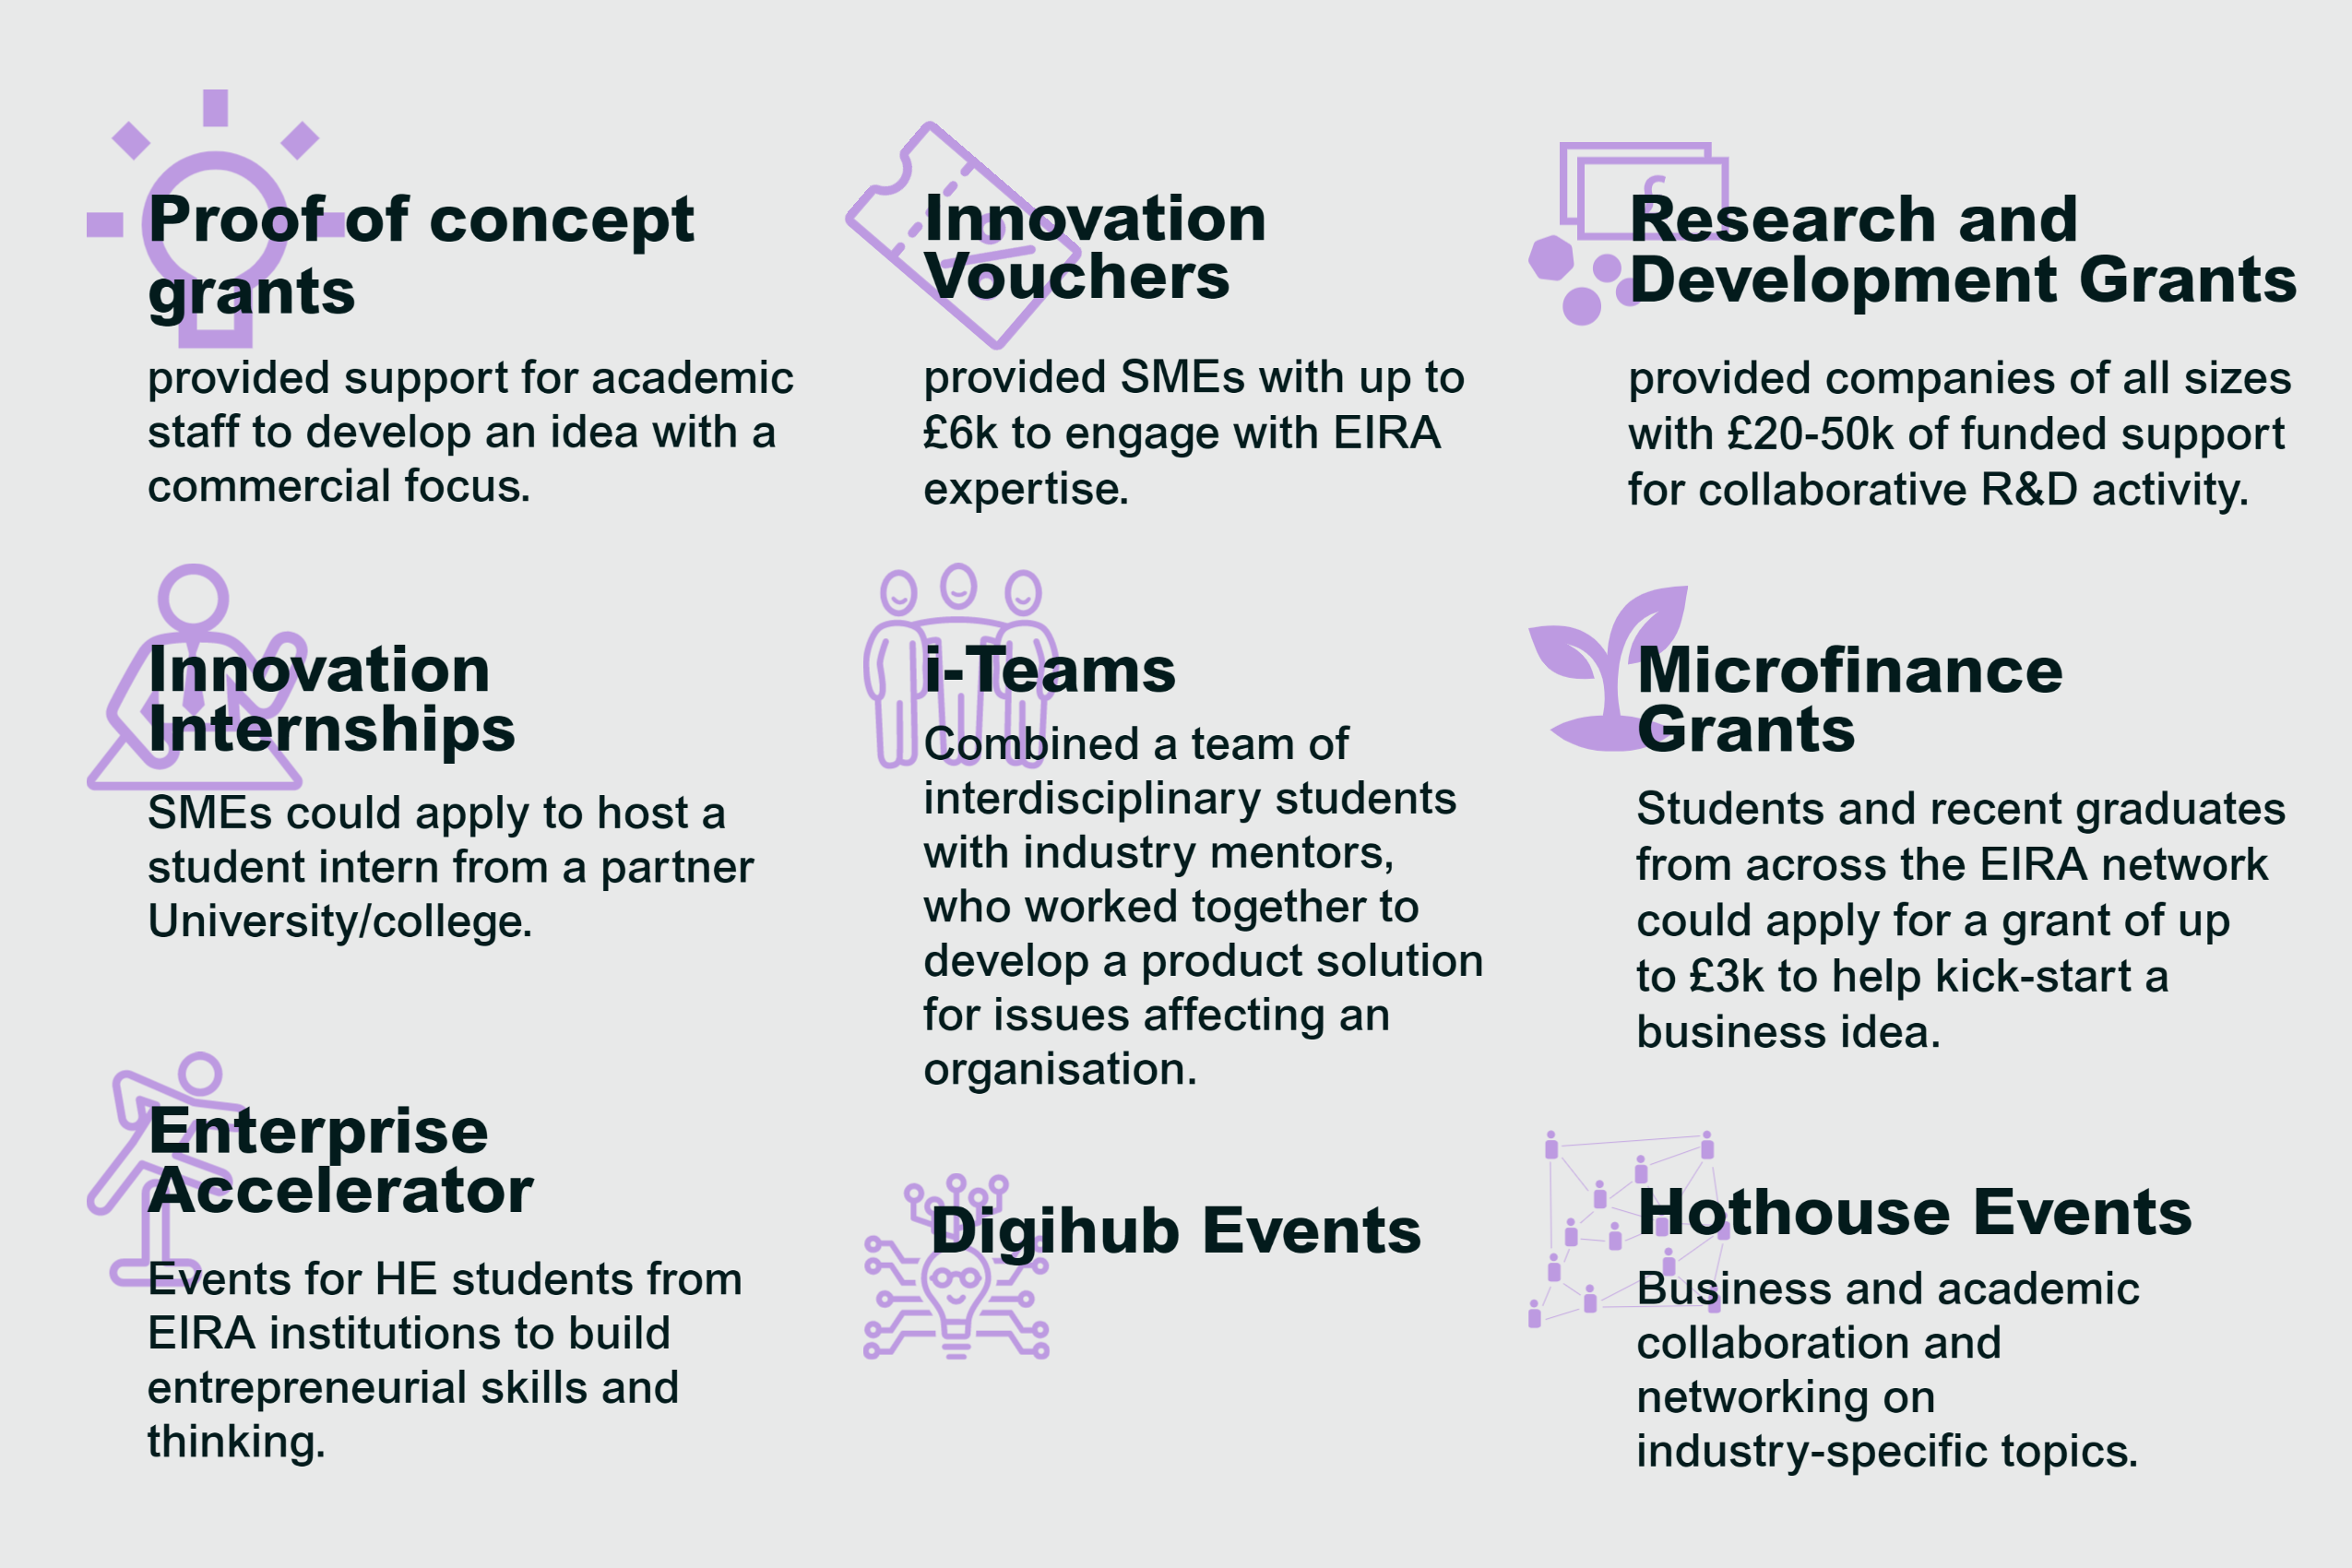 An inforgraphic listing the 9 EIRA interventions: proof of concept grants, innovation vouchers, research and development grants, innovation internships, i-Teams, microfinance grants, enterprise accelerator, digihub events and hothouse events.